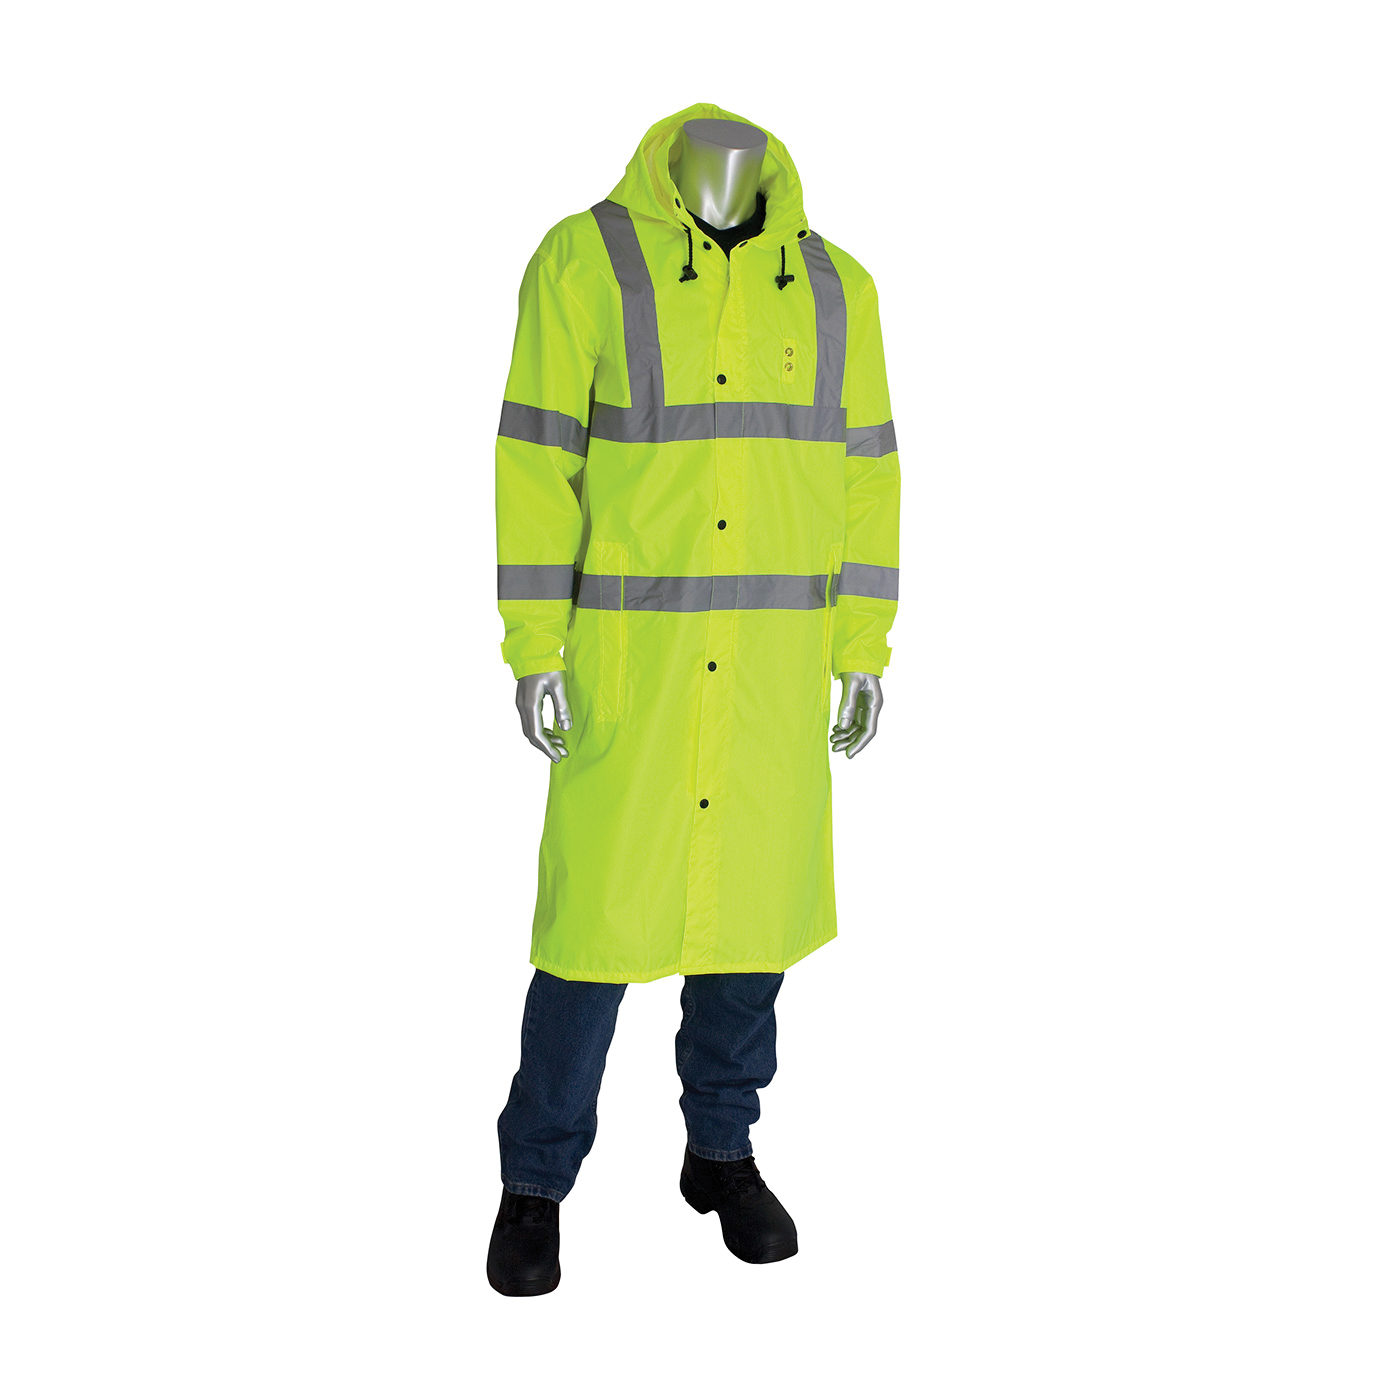 PIP® FALCON™ Viz™ 353-1048-LY/4X All Purpose Waterproof Rain Coat, 4XL, Hi-Viz Lime Yellow, 150D Polyester Coated with Polyurethane, Resists: Water, ANSI 107 Type R Class 3, Concealed Hood